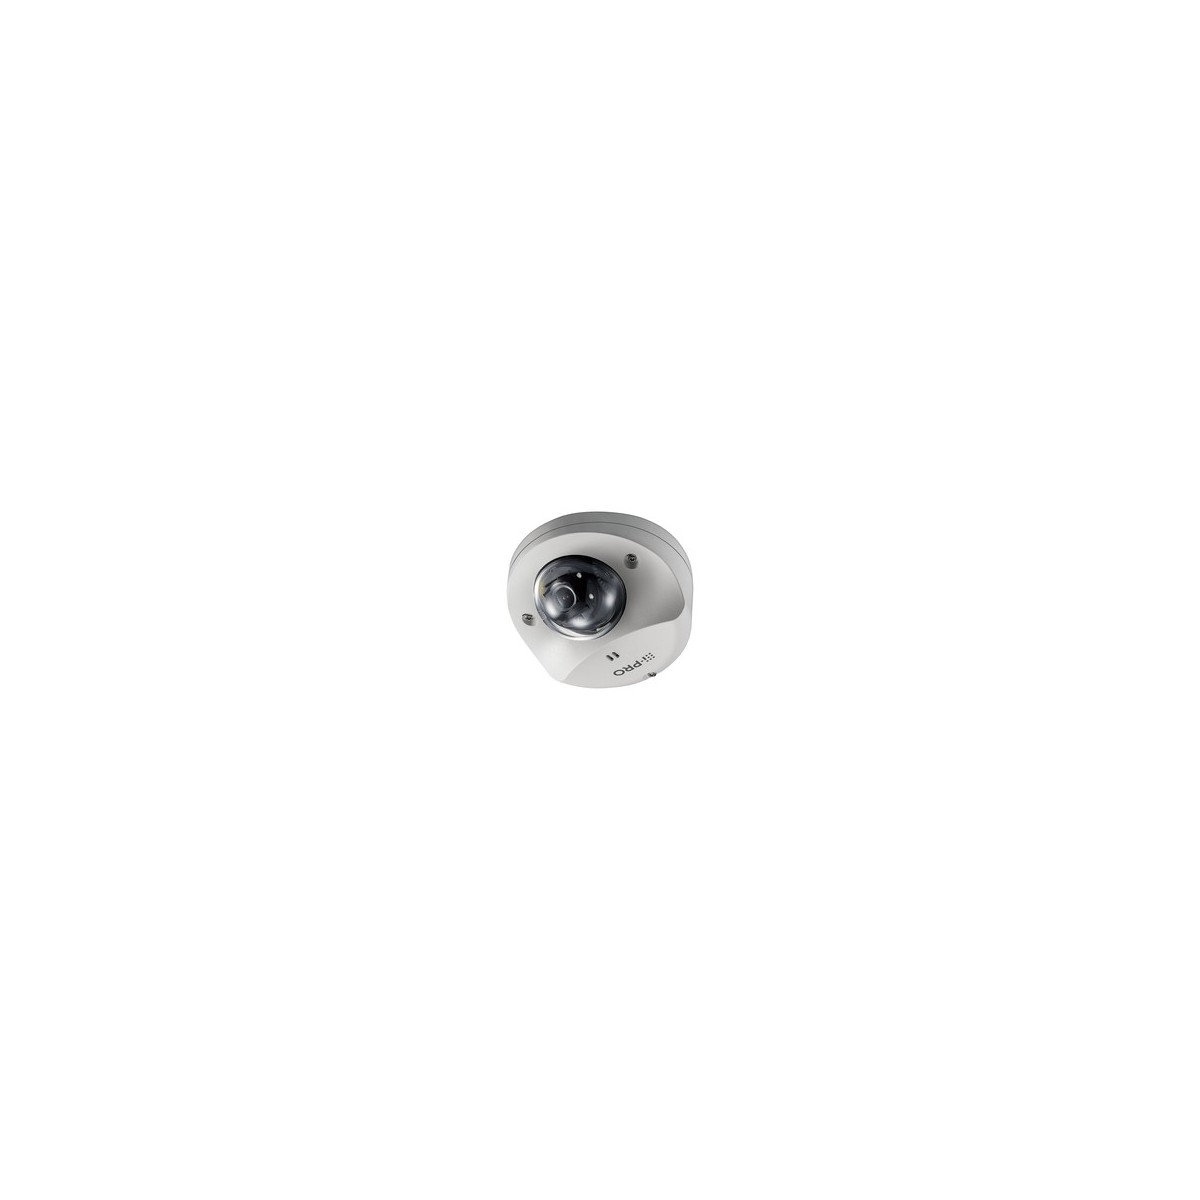 Panasonic i-PRO WV-S3531L - IP security camera - Indoor - Wired - 144 dB - Ceiling-wall - Black - White